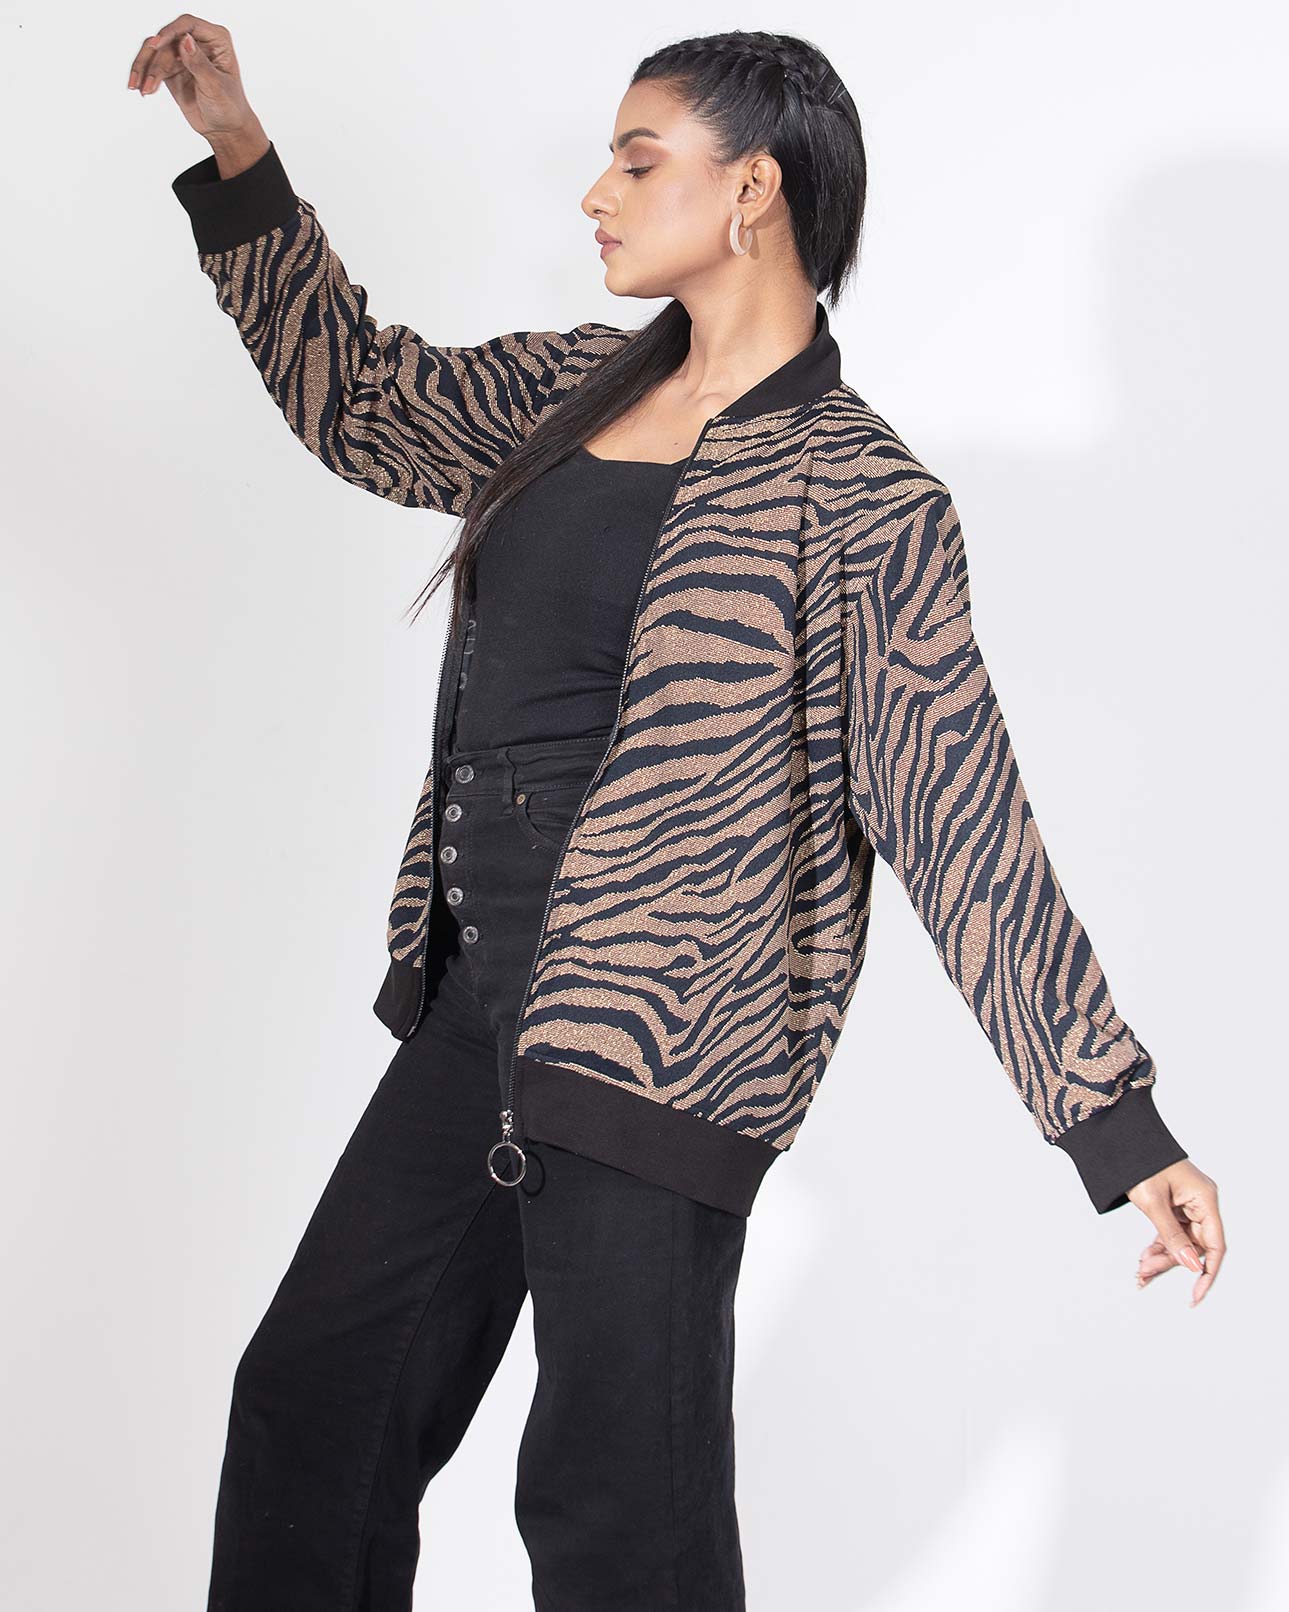 Tiger Printed Jacket for Women